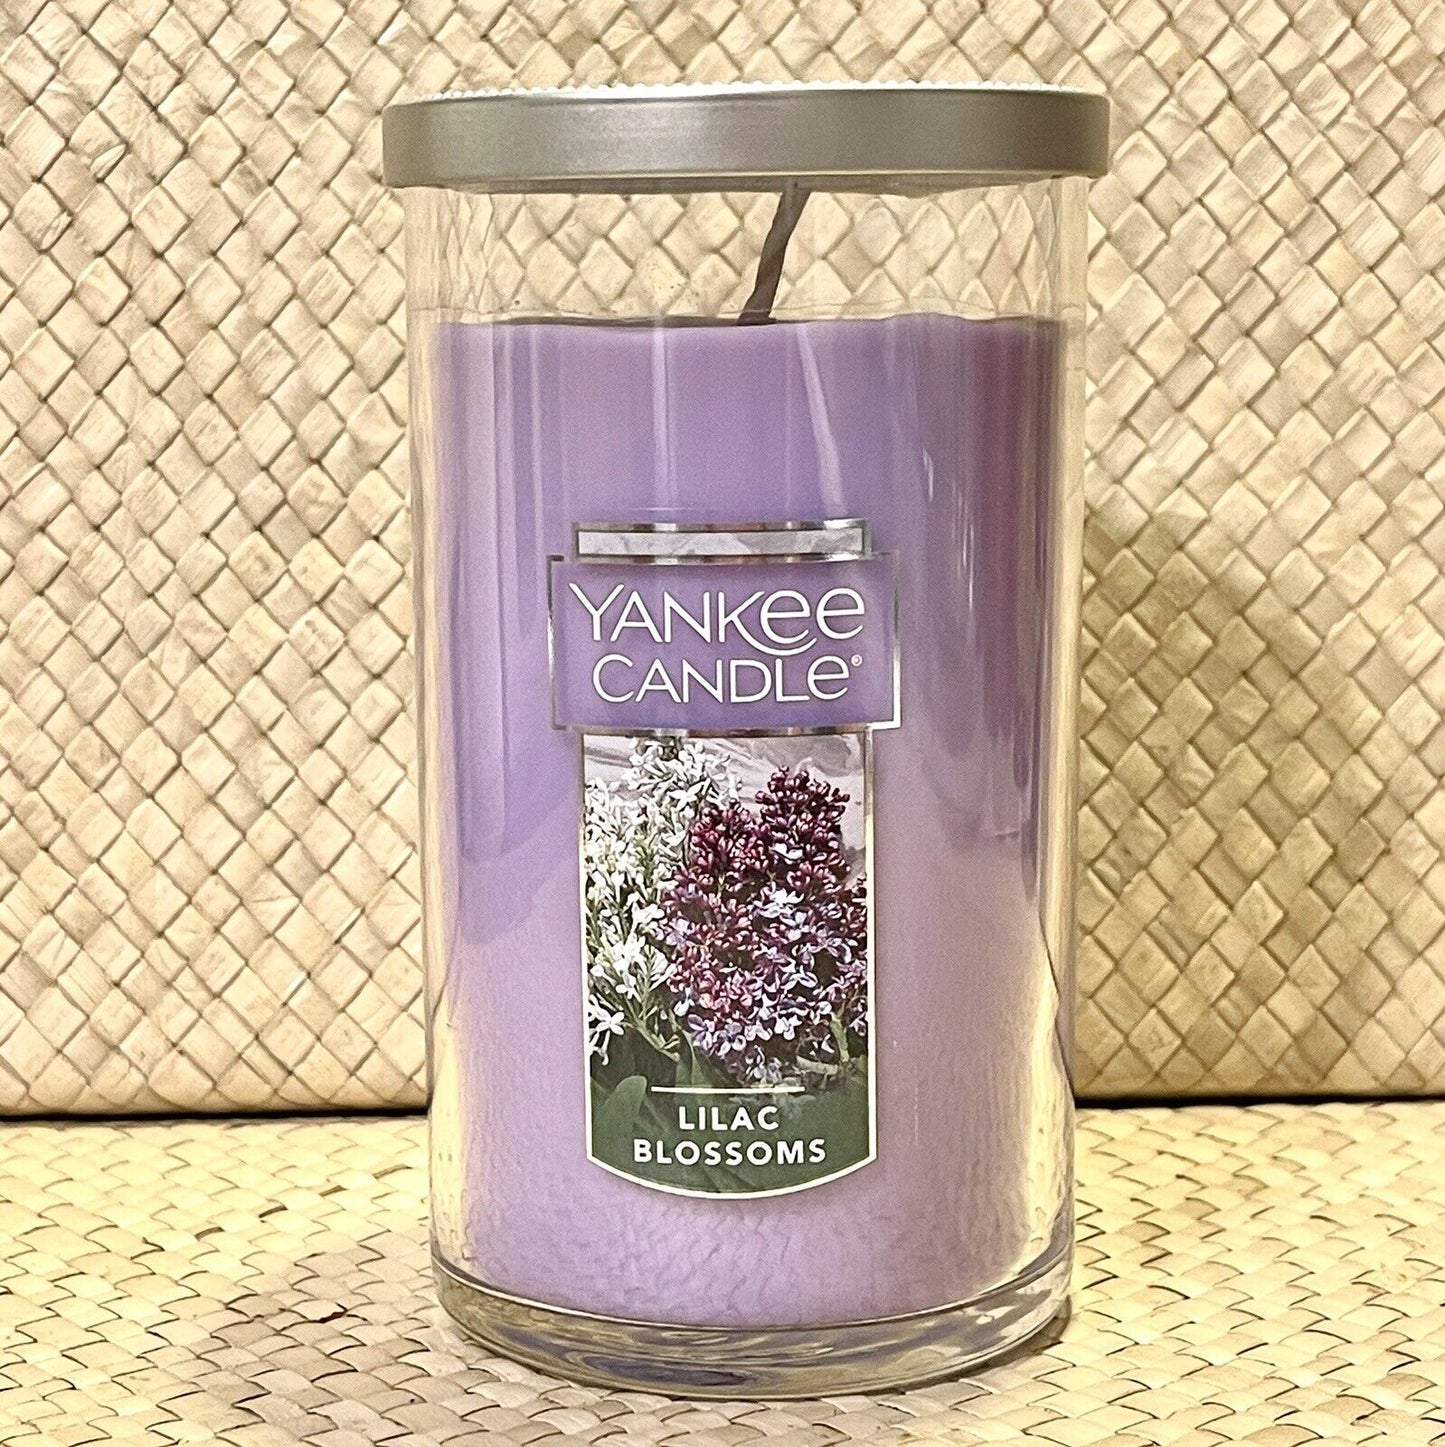 Yankee Candle New LILAC BLOSSOMS 12 oz Tumbler Purple Wax Floral